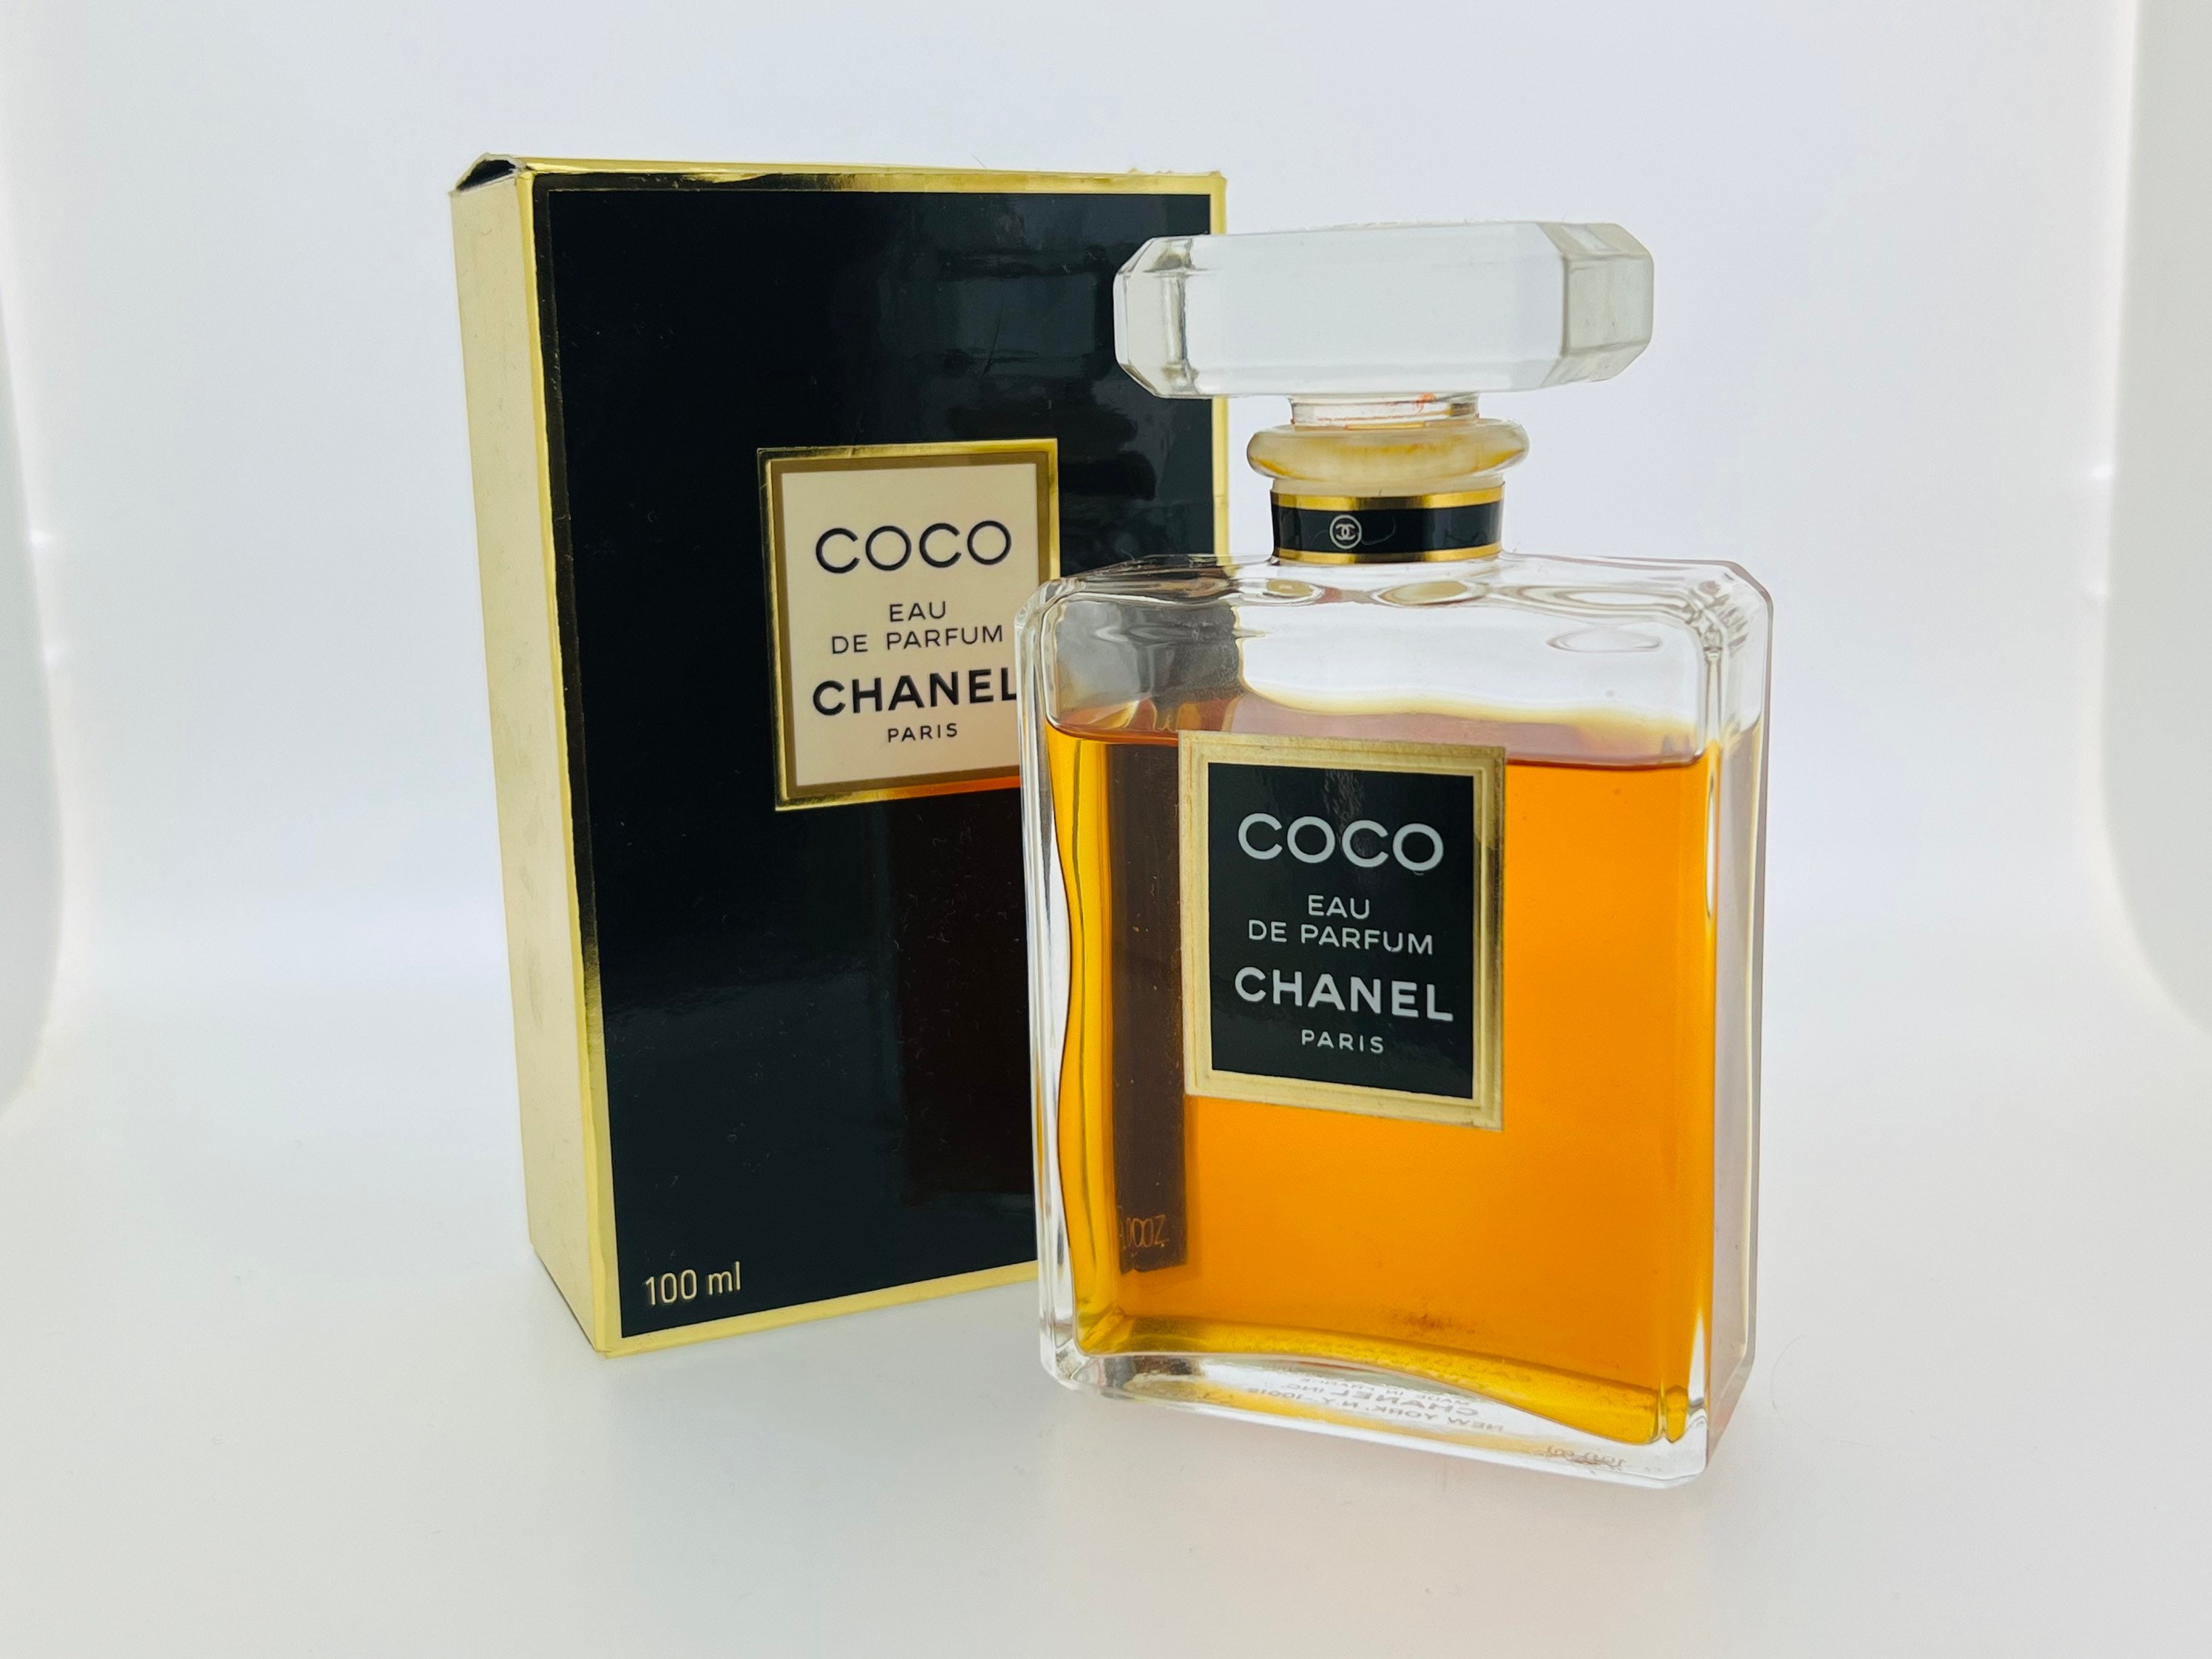 CHANEL N°19 PARFUM Review - No19 is one of the most green and